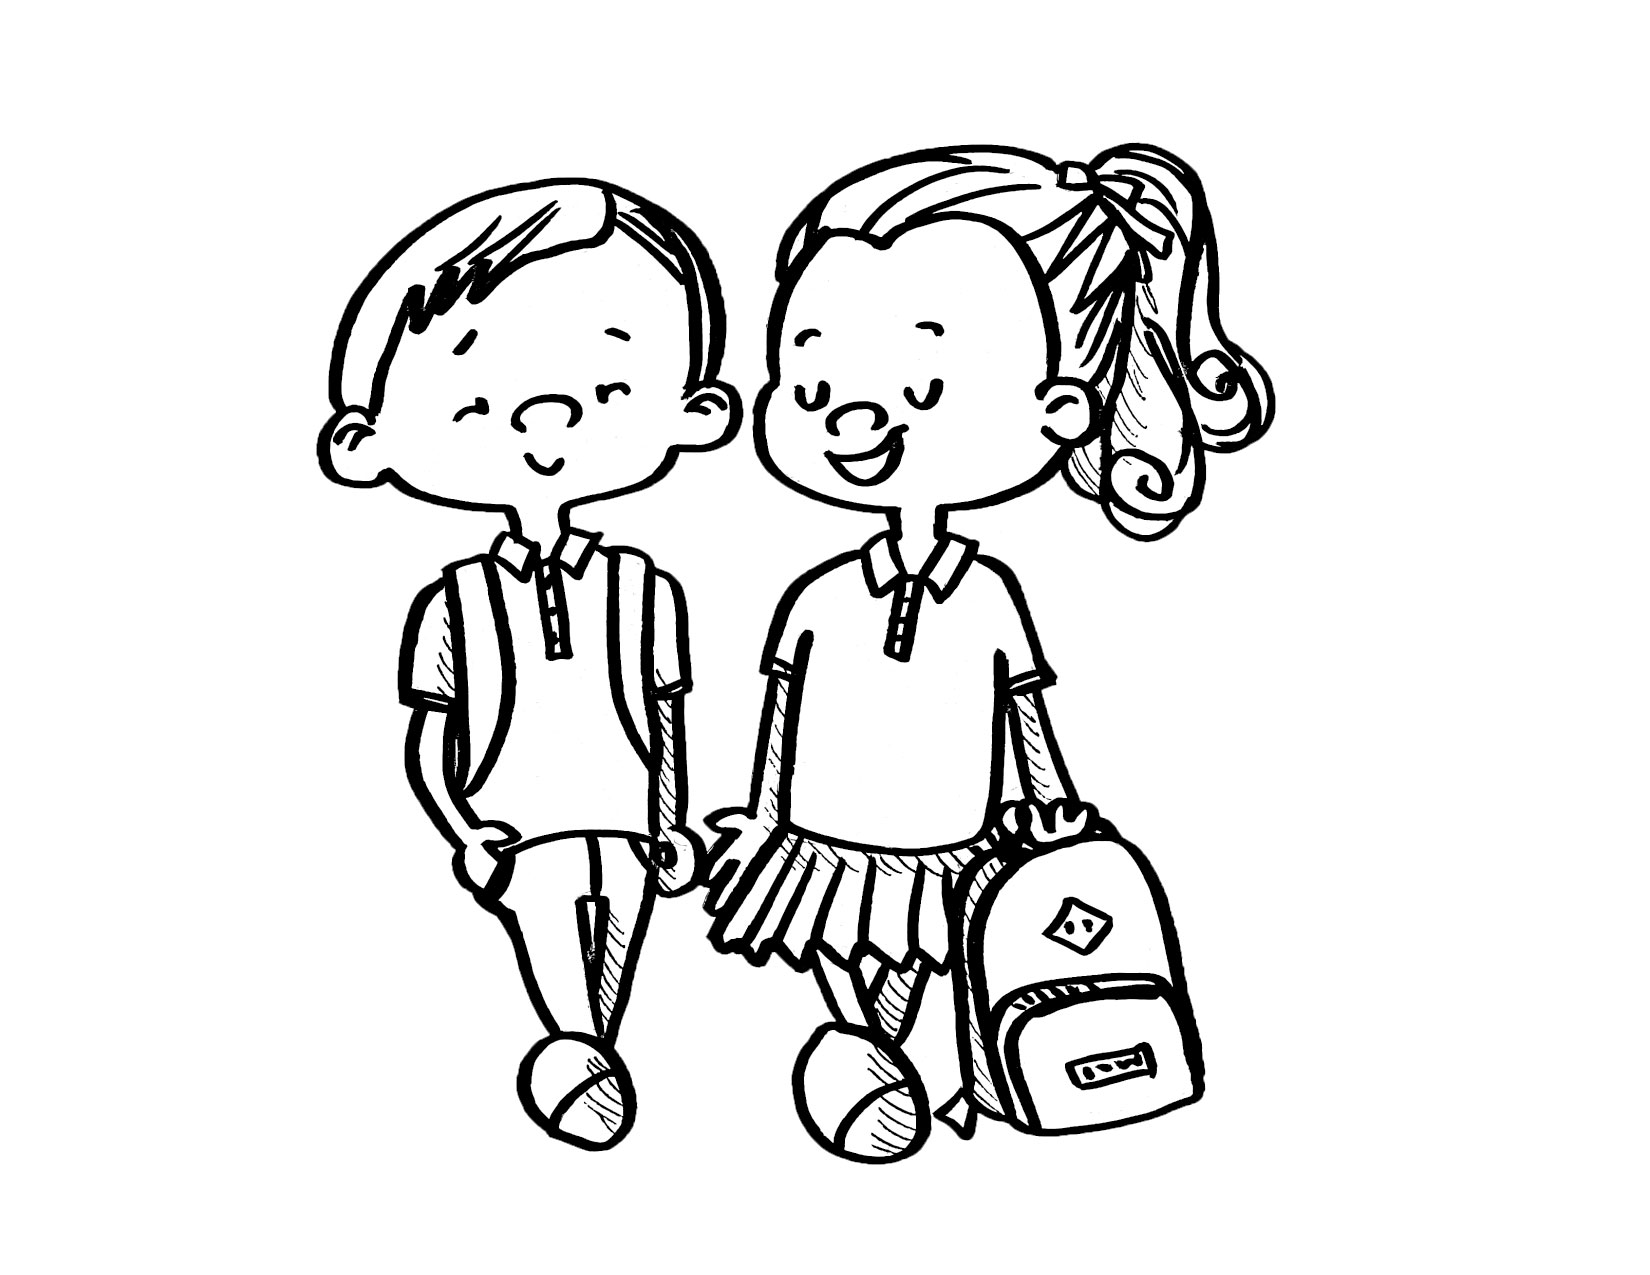 A boy and a girl holding a backpack walking together